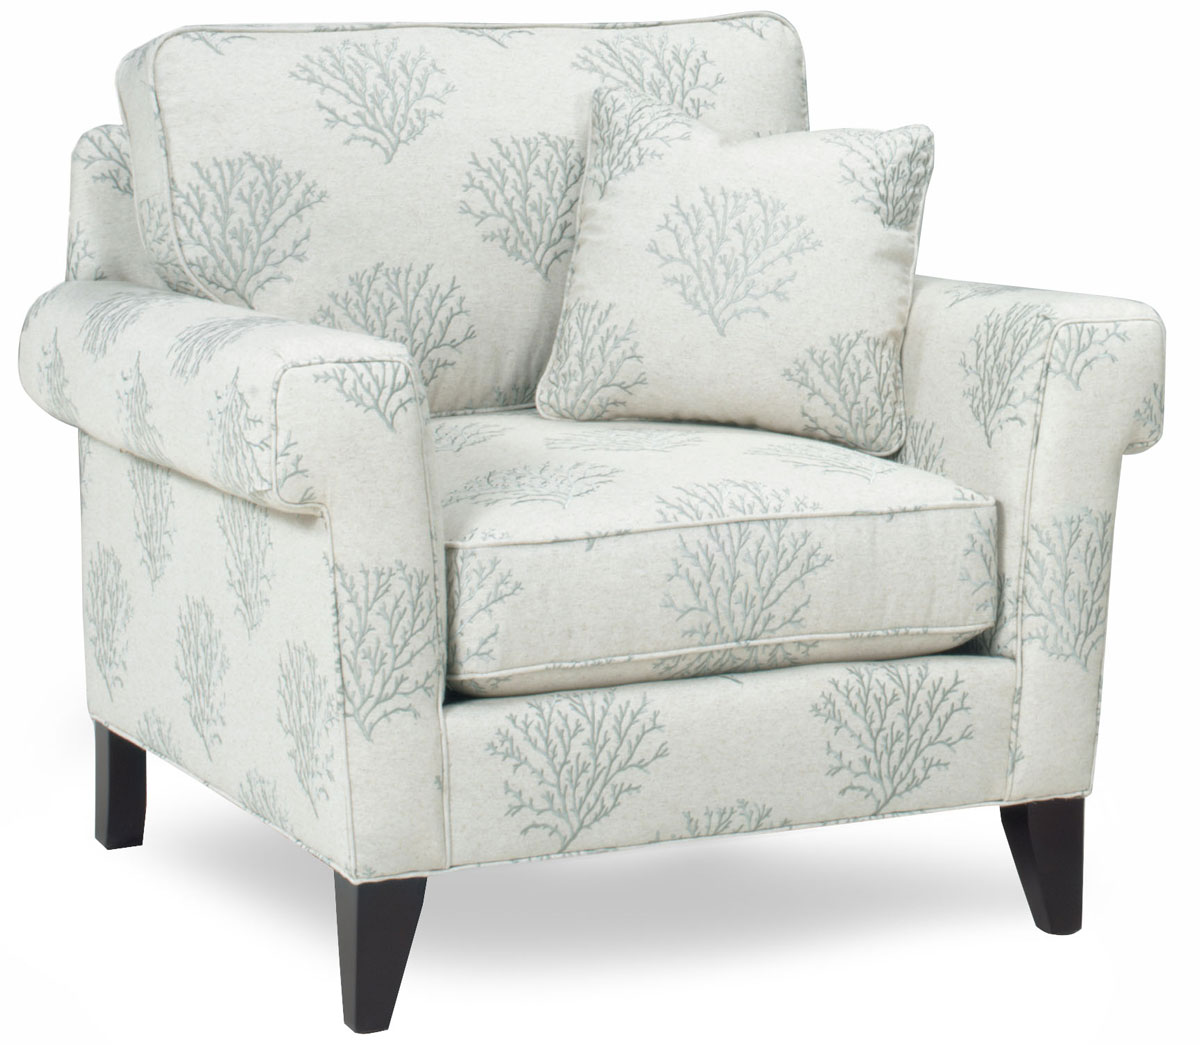 Temple Furniture 915 Ryker Chair